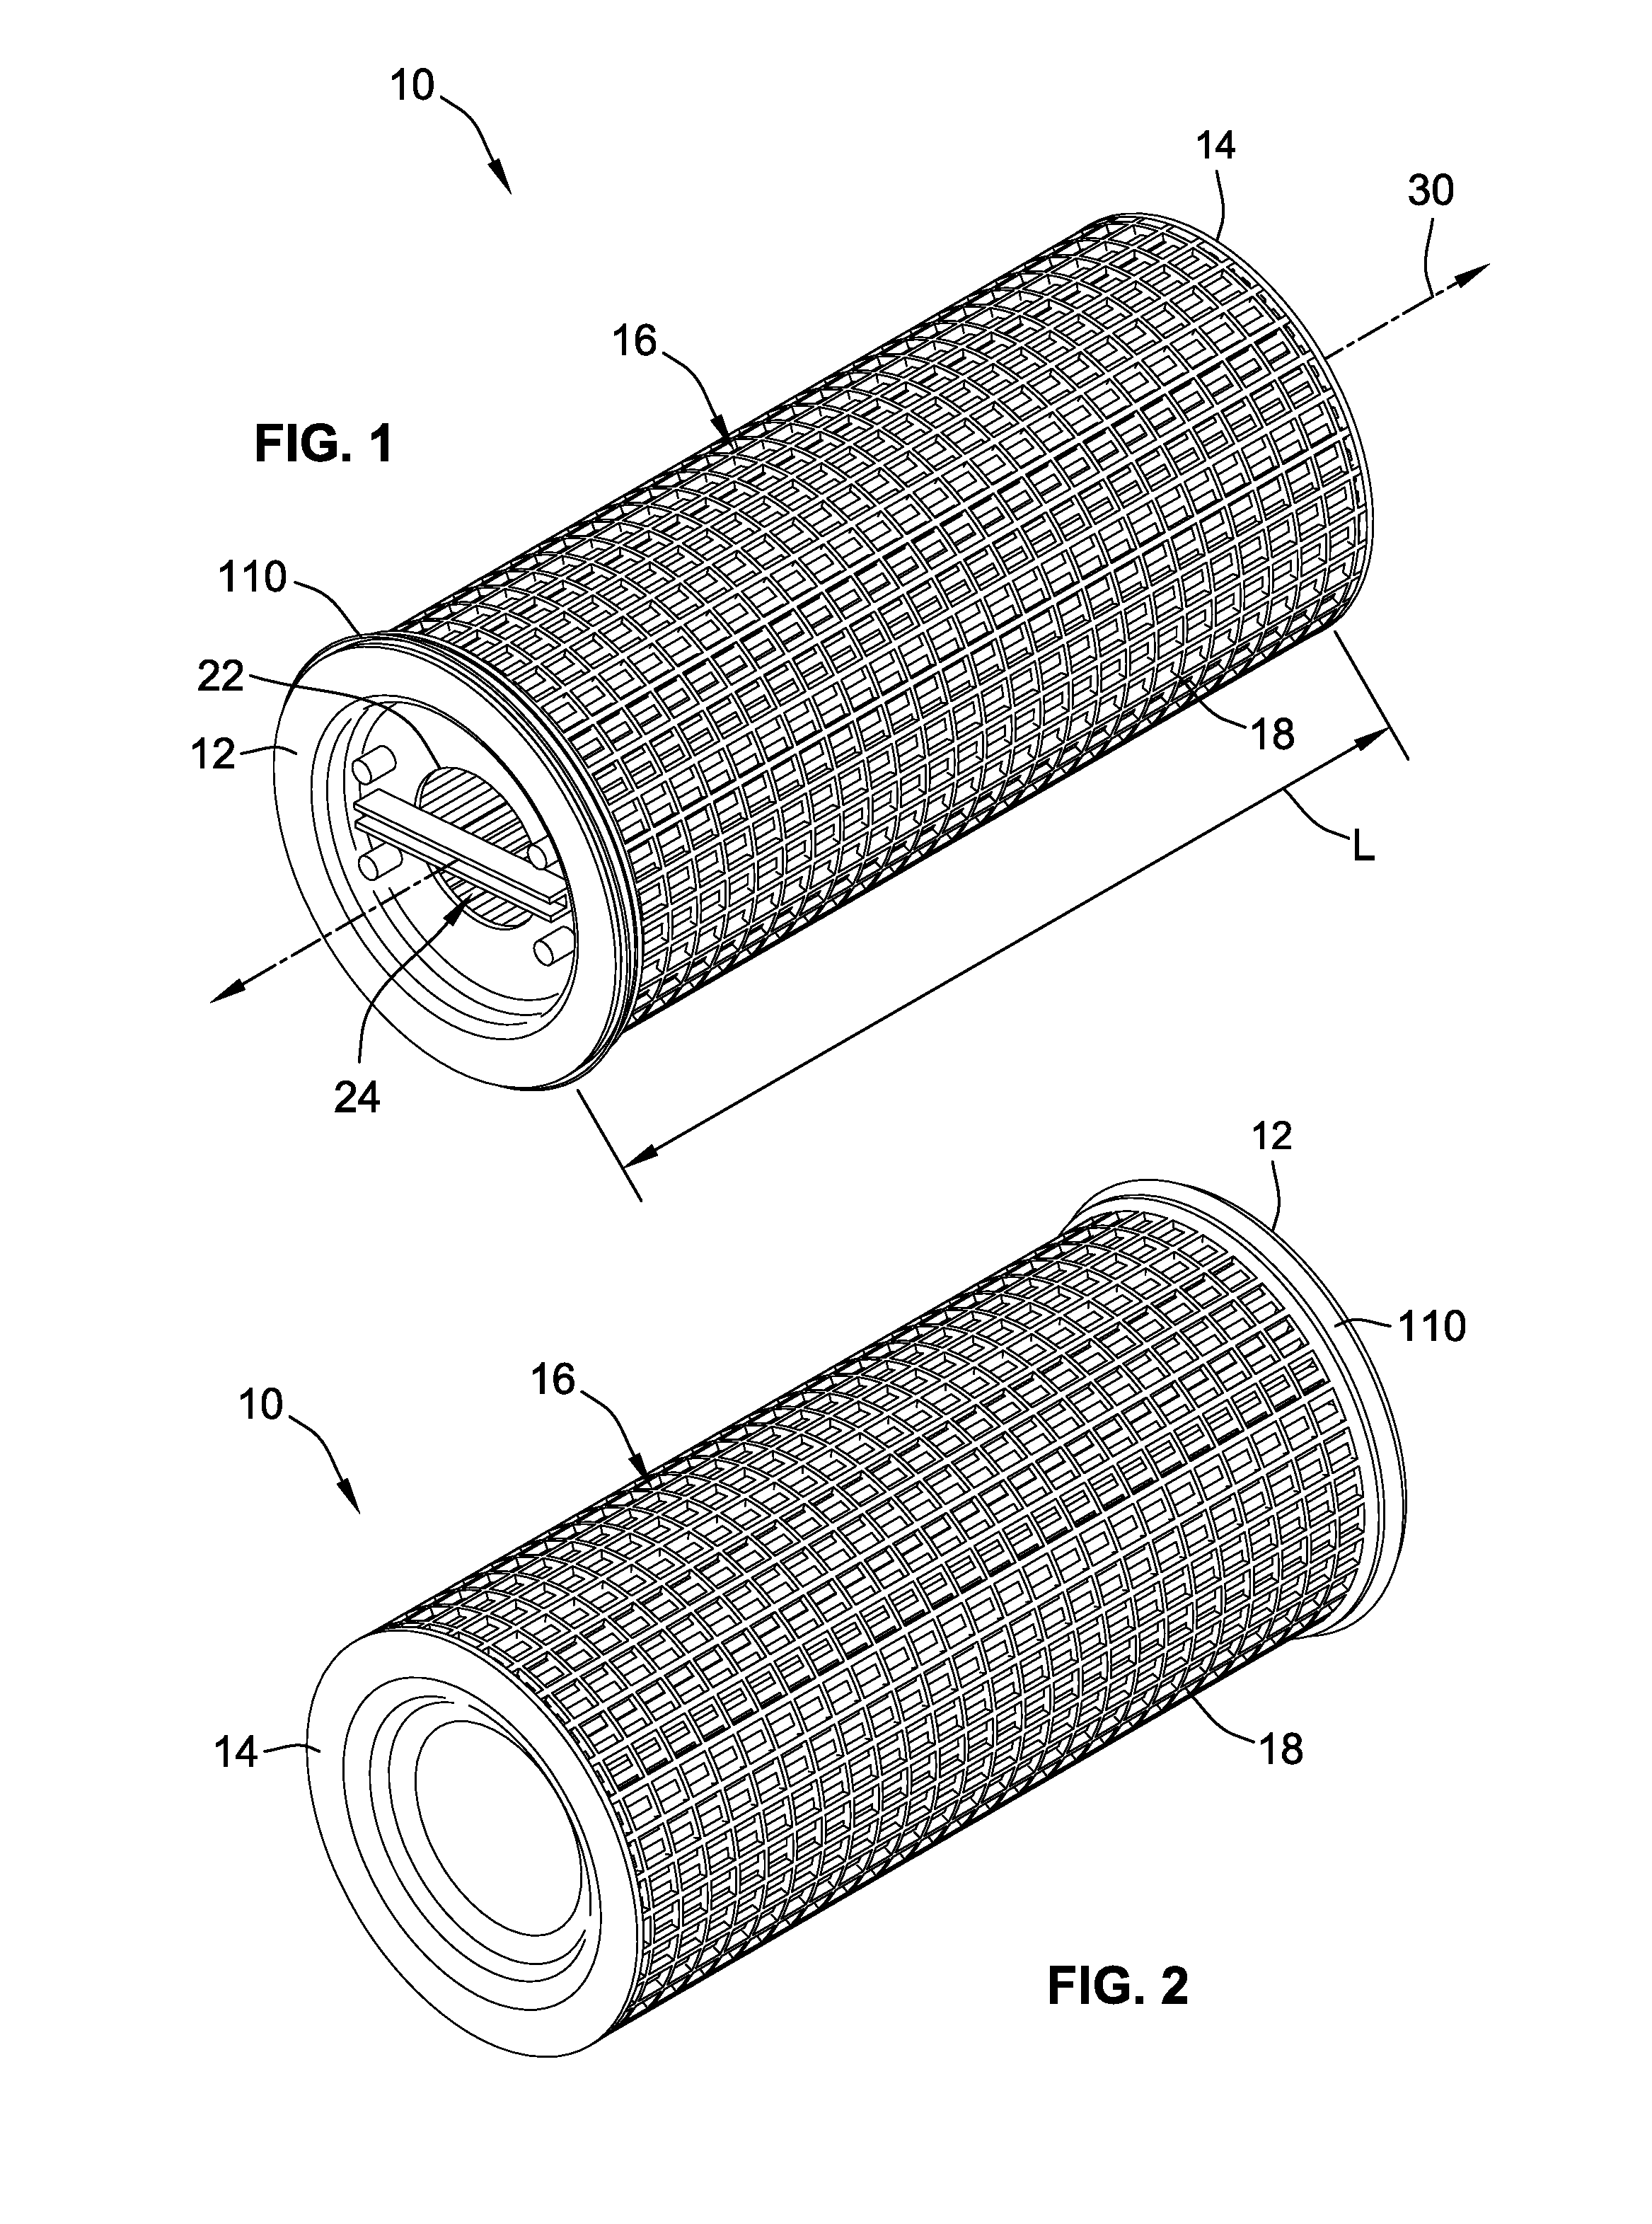 Seal devices for filters